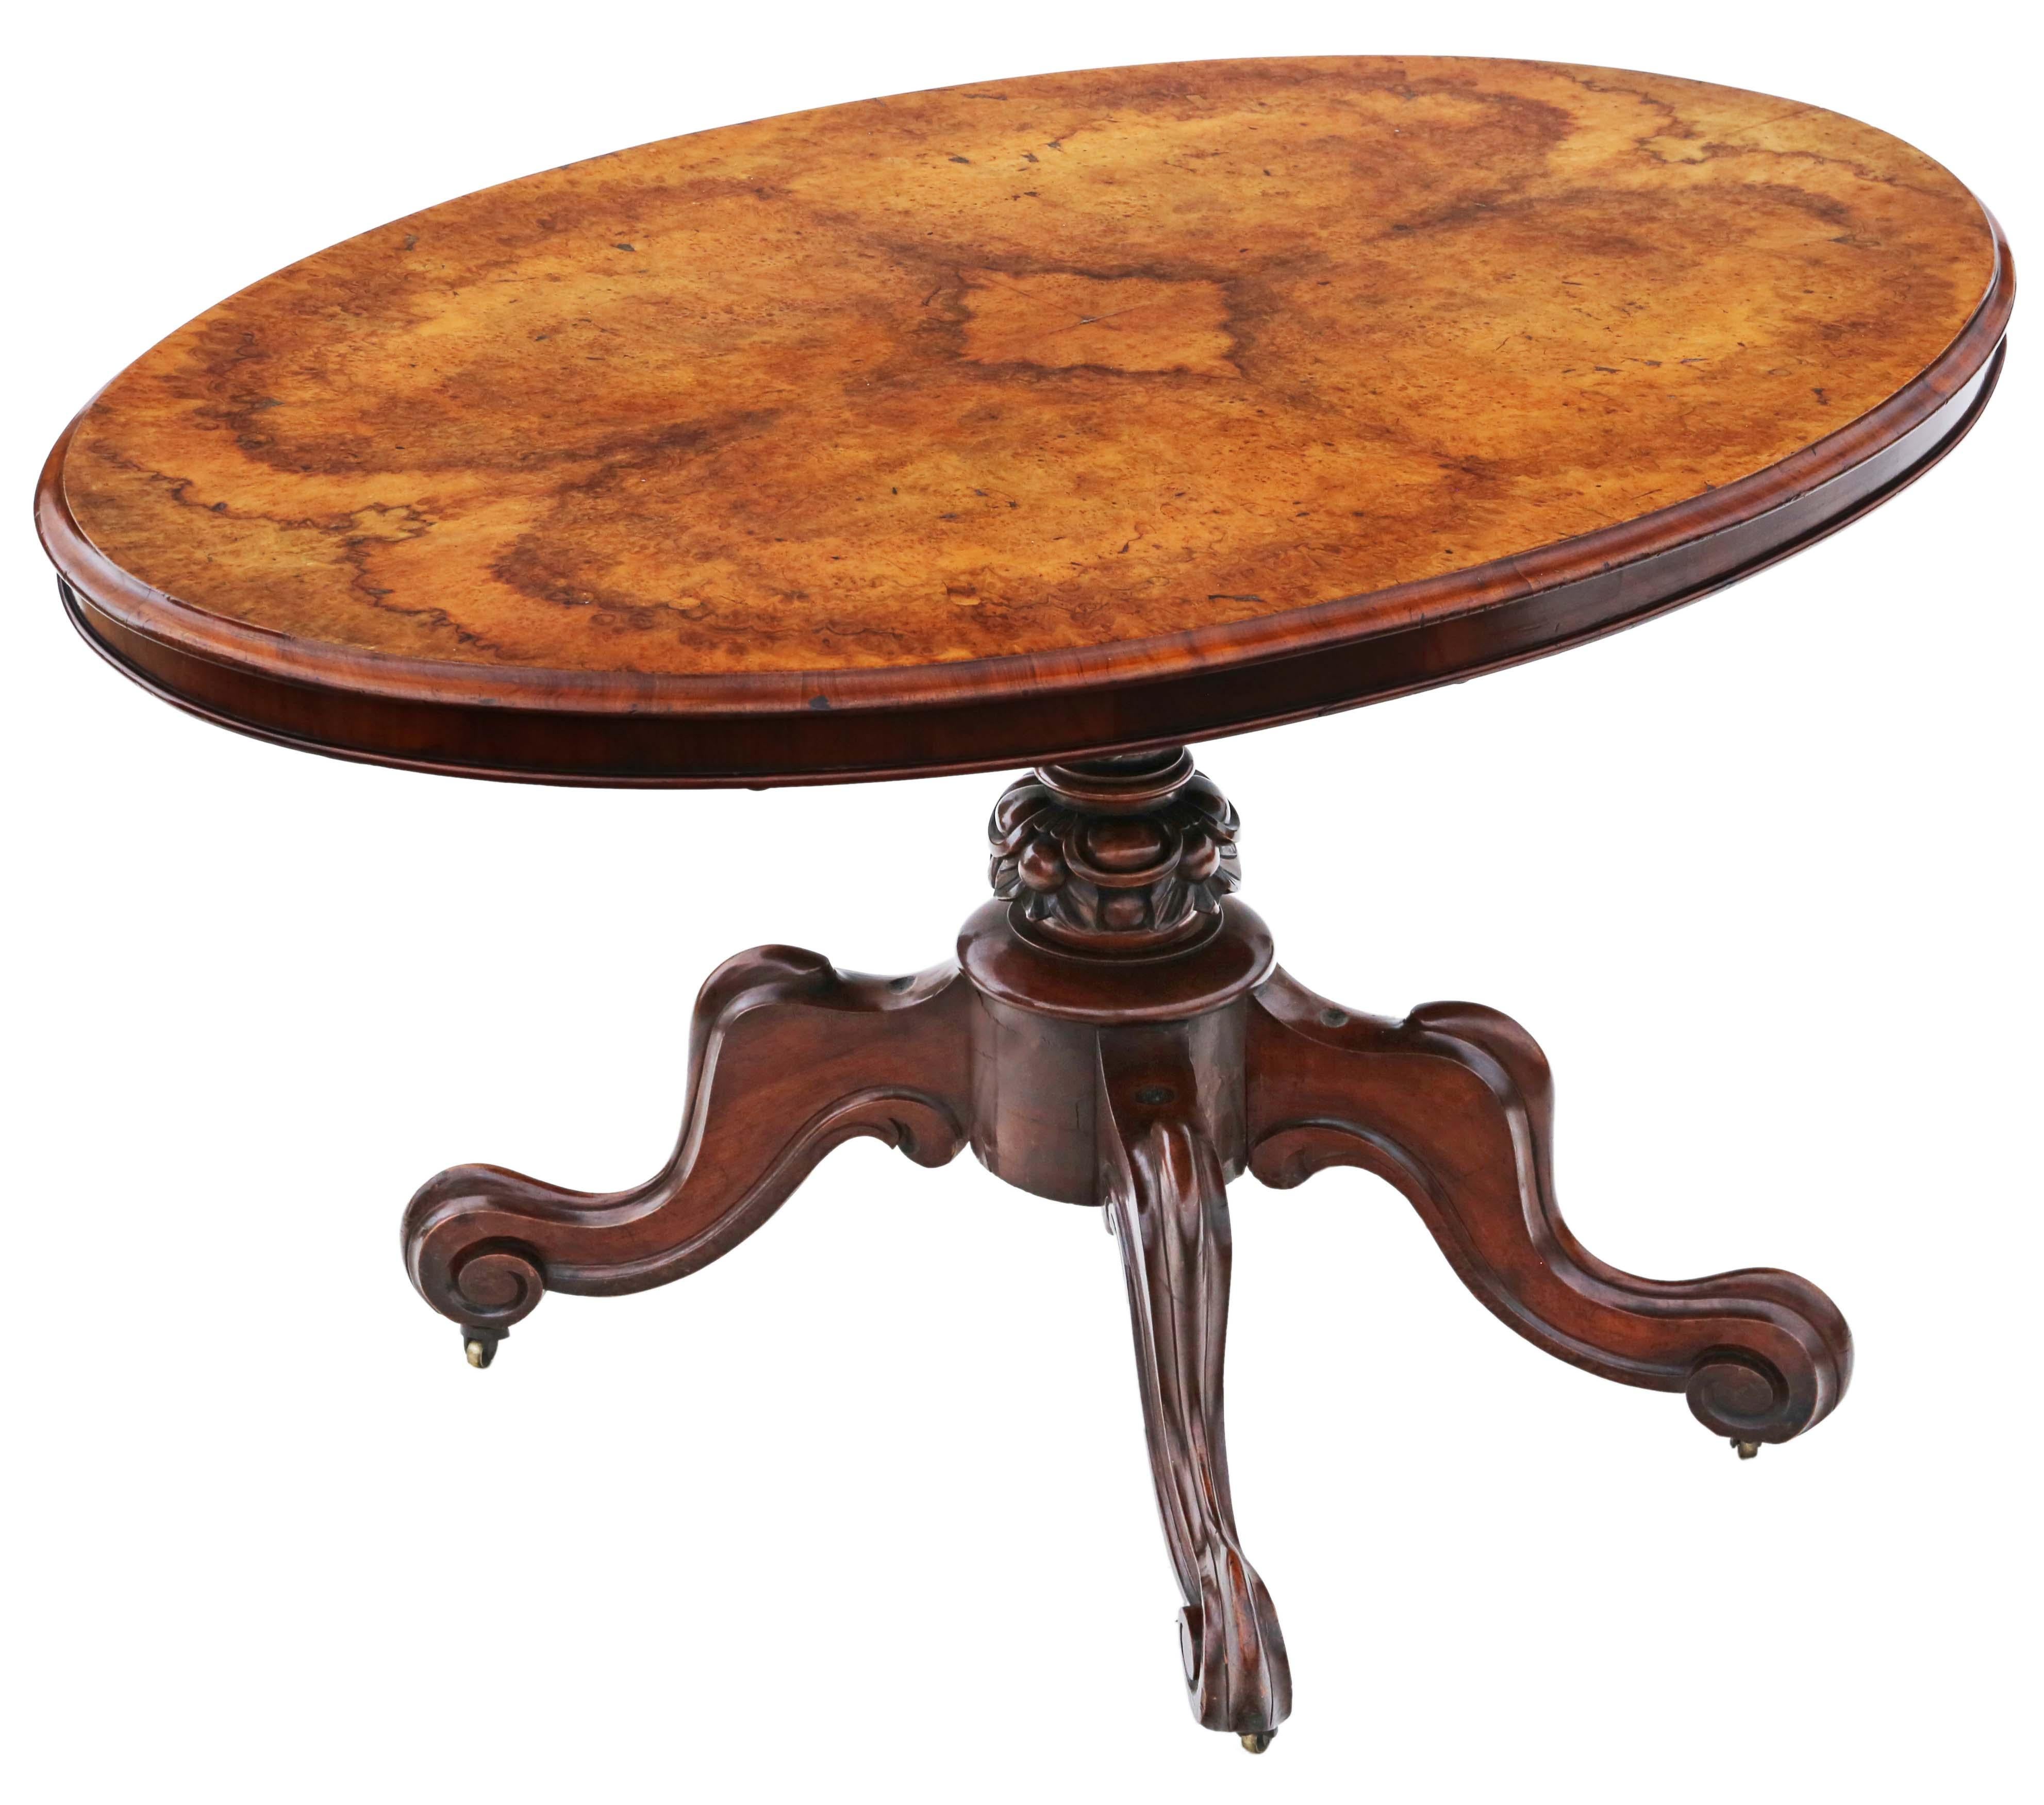 Antique fine quality large Victorian 19th Century burr walnut oval tilt top loo breakfast table.

This is a lovely table (far better than most), that is full of age, charm and character. Great colour and best patina.

Rare and attractive. Tables of